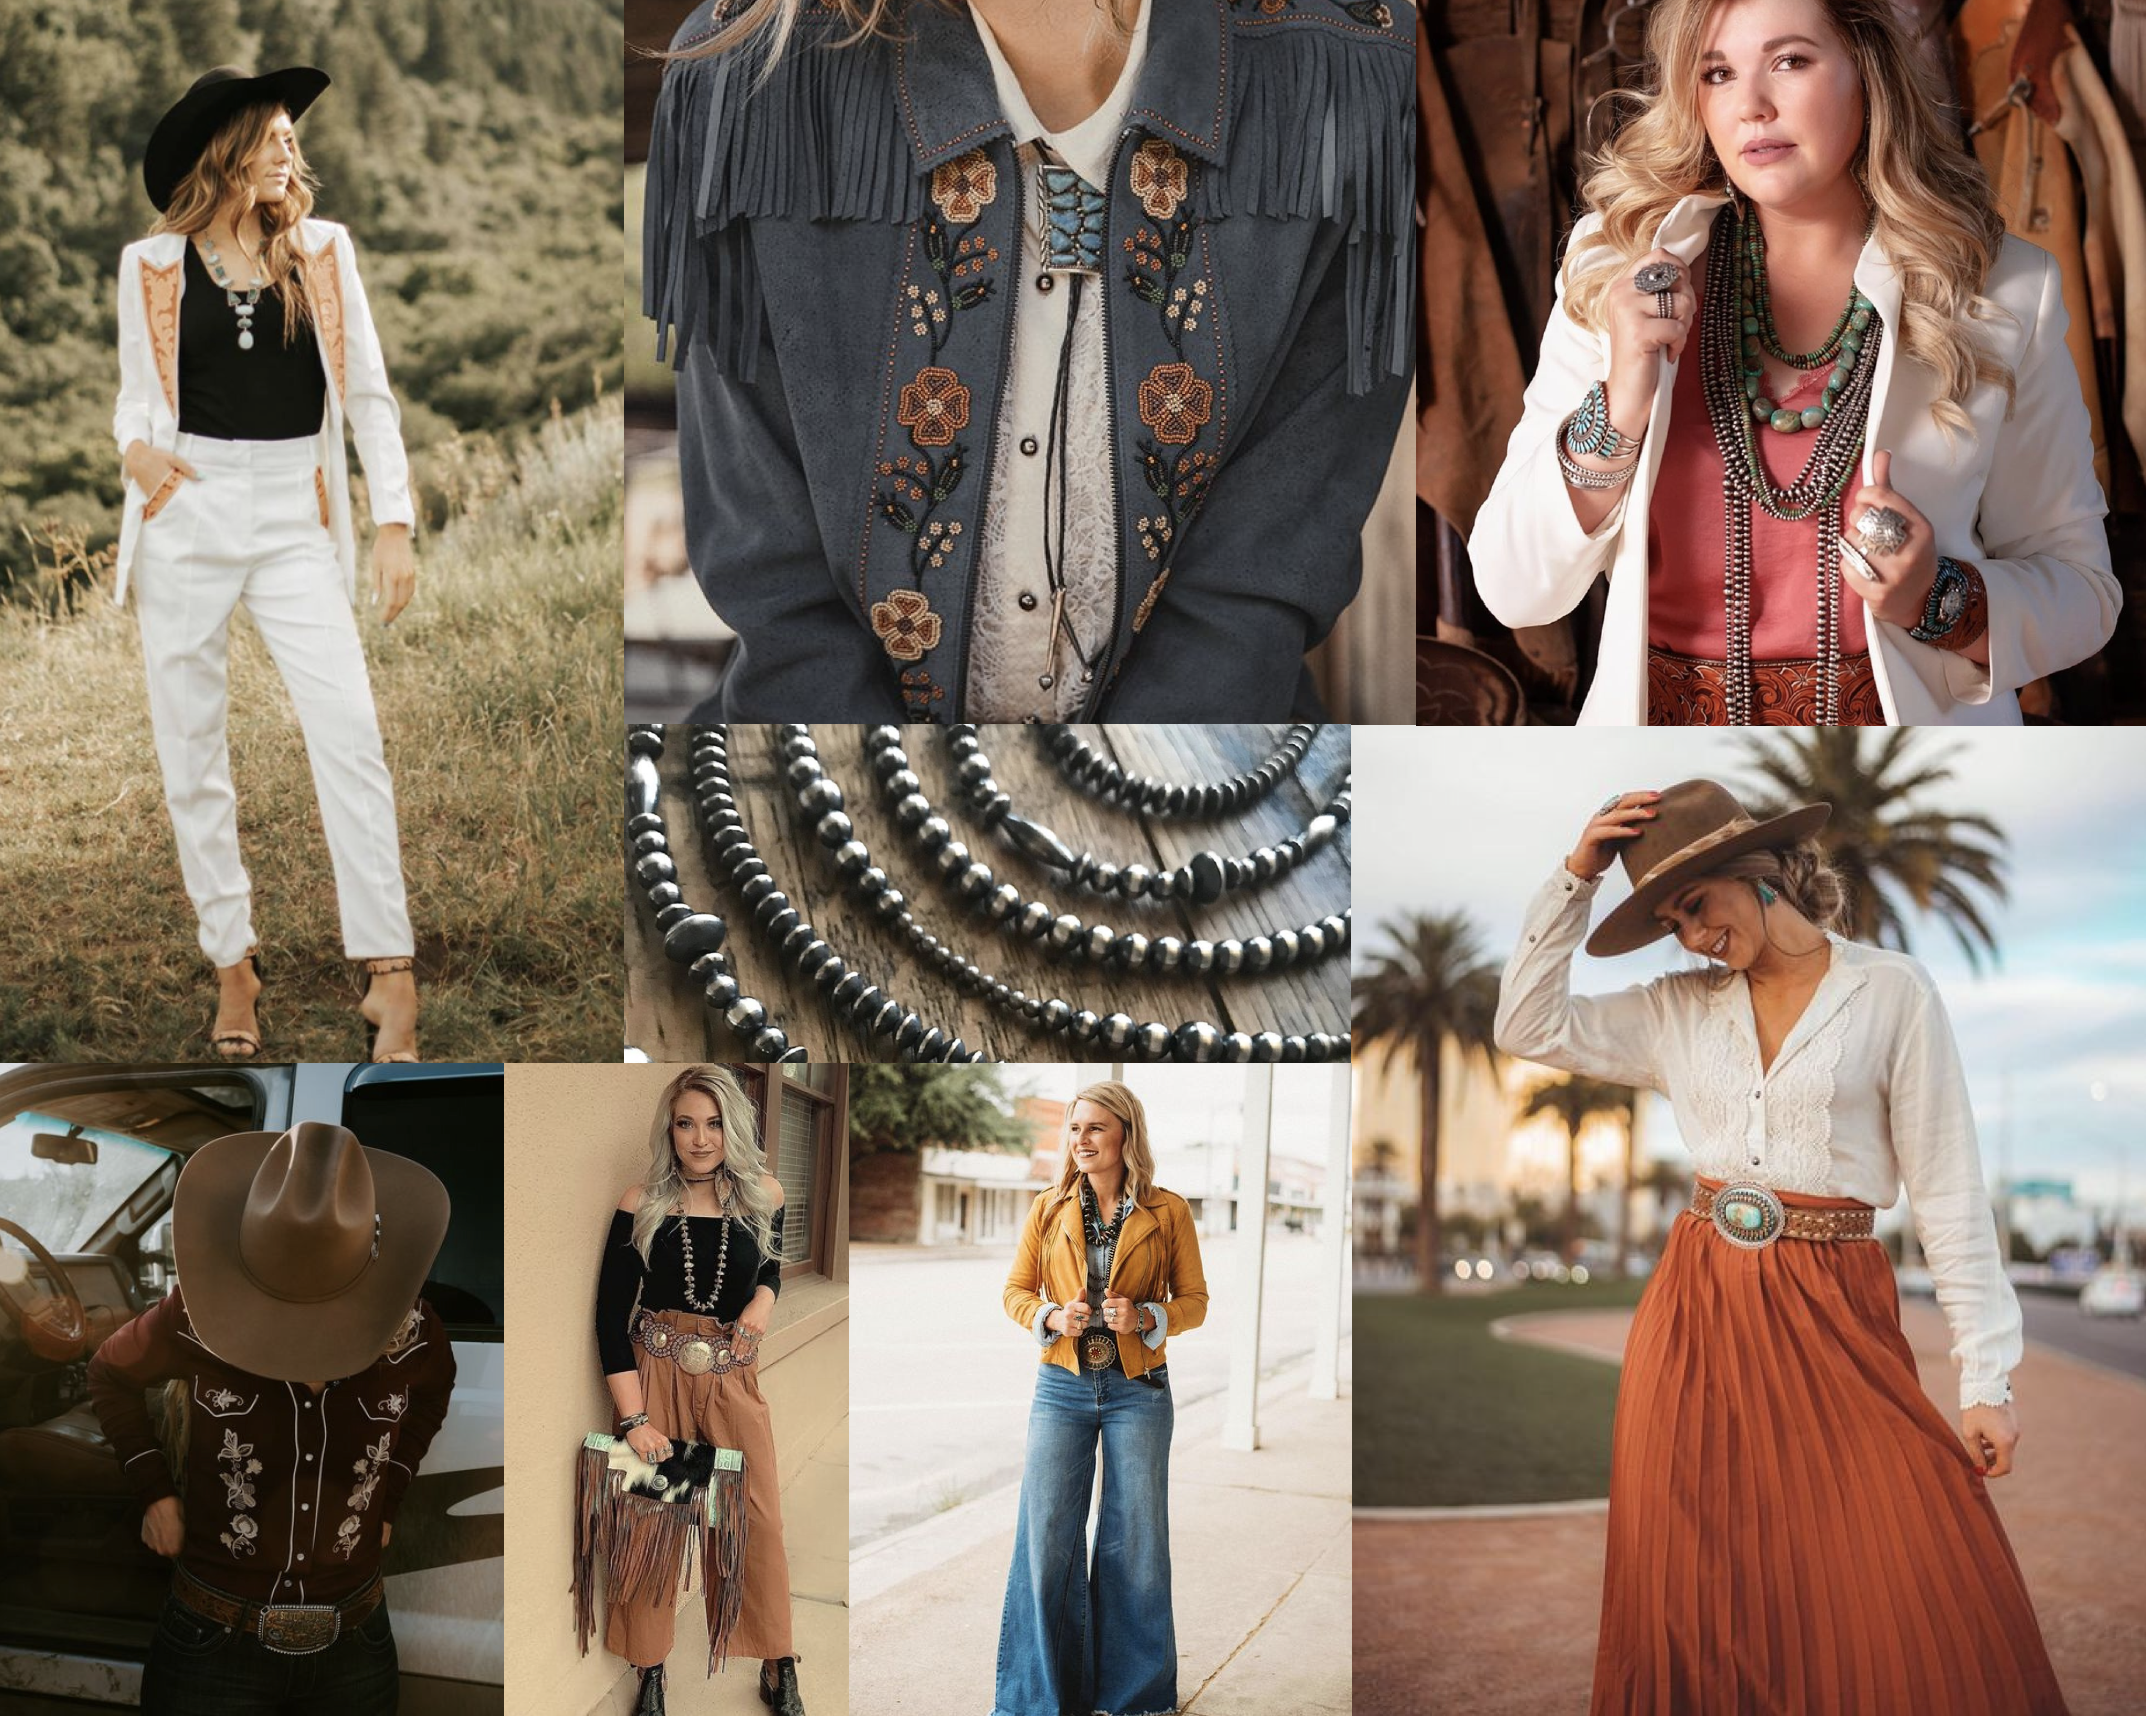 Fort Worth Fashion For the 2020 Texas NFR - Cowboys and Indians Magazine